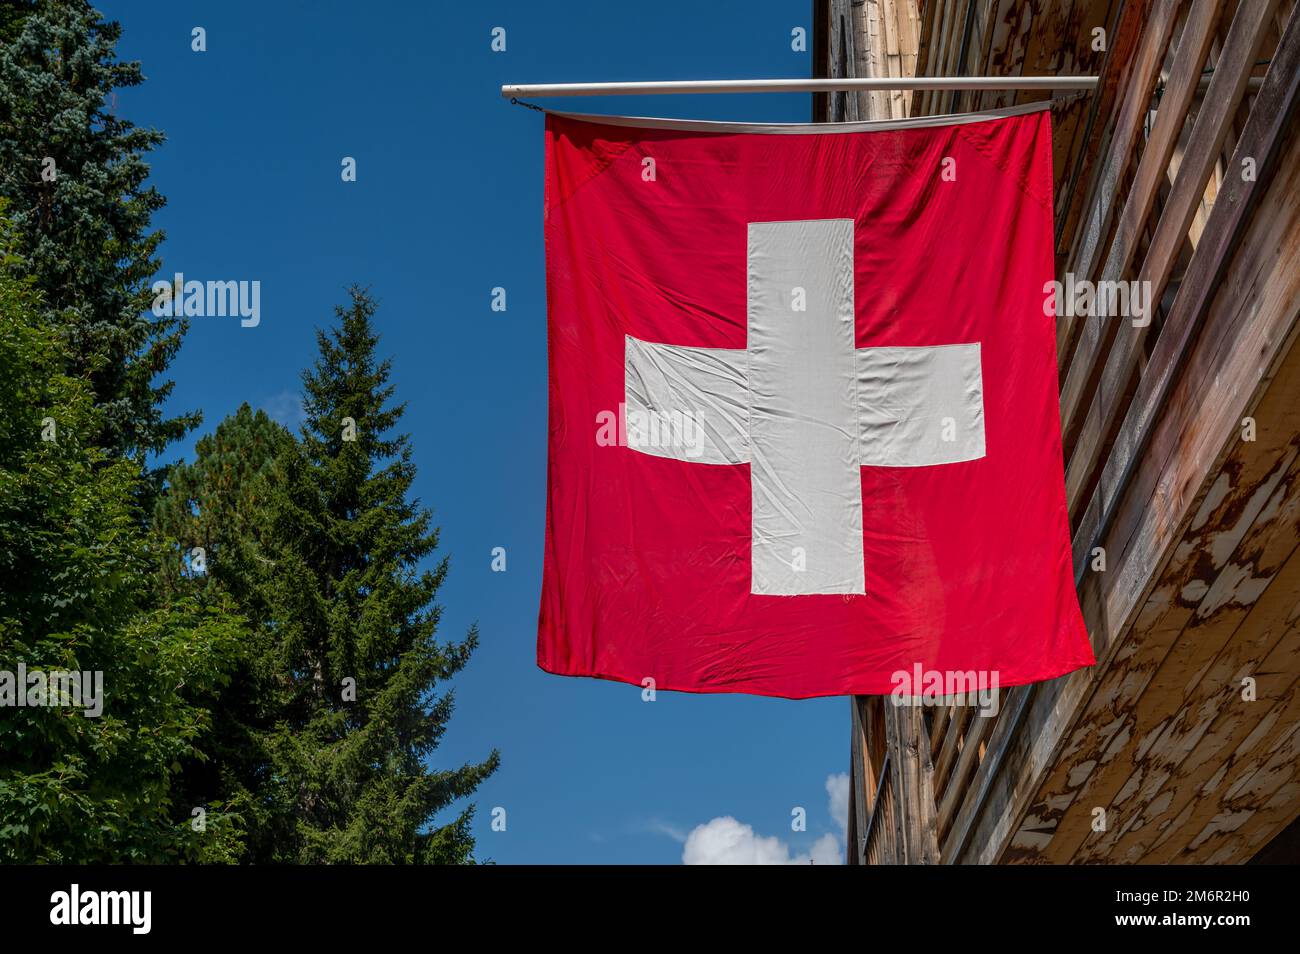 Swiss flag. Switzerland flag hanging on roof against blue sky. One red square flag with a white cross in the centre. Stock Photo